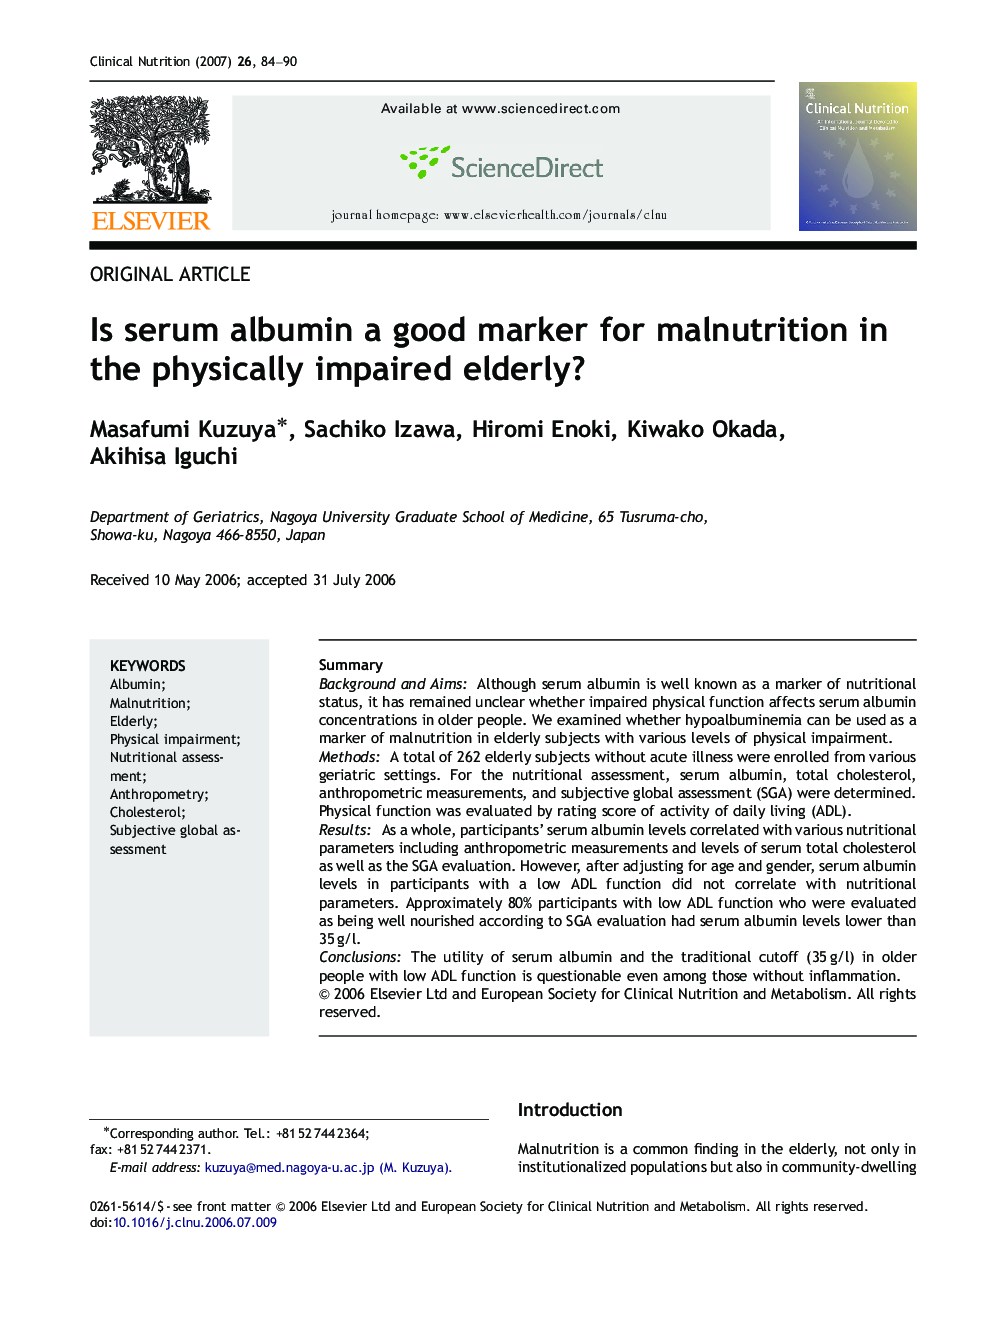 Is serum albumin a good marker for malnutrition in the physically impaired elderly?